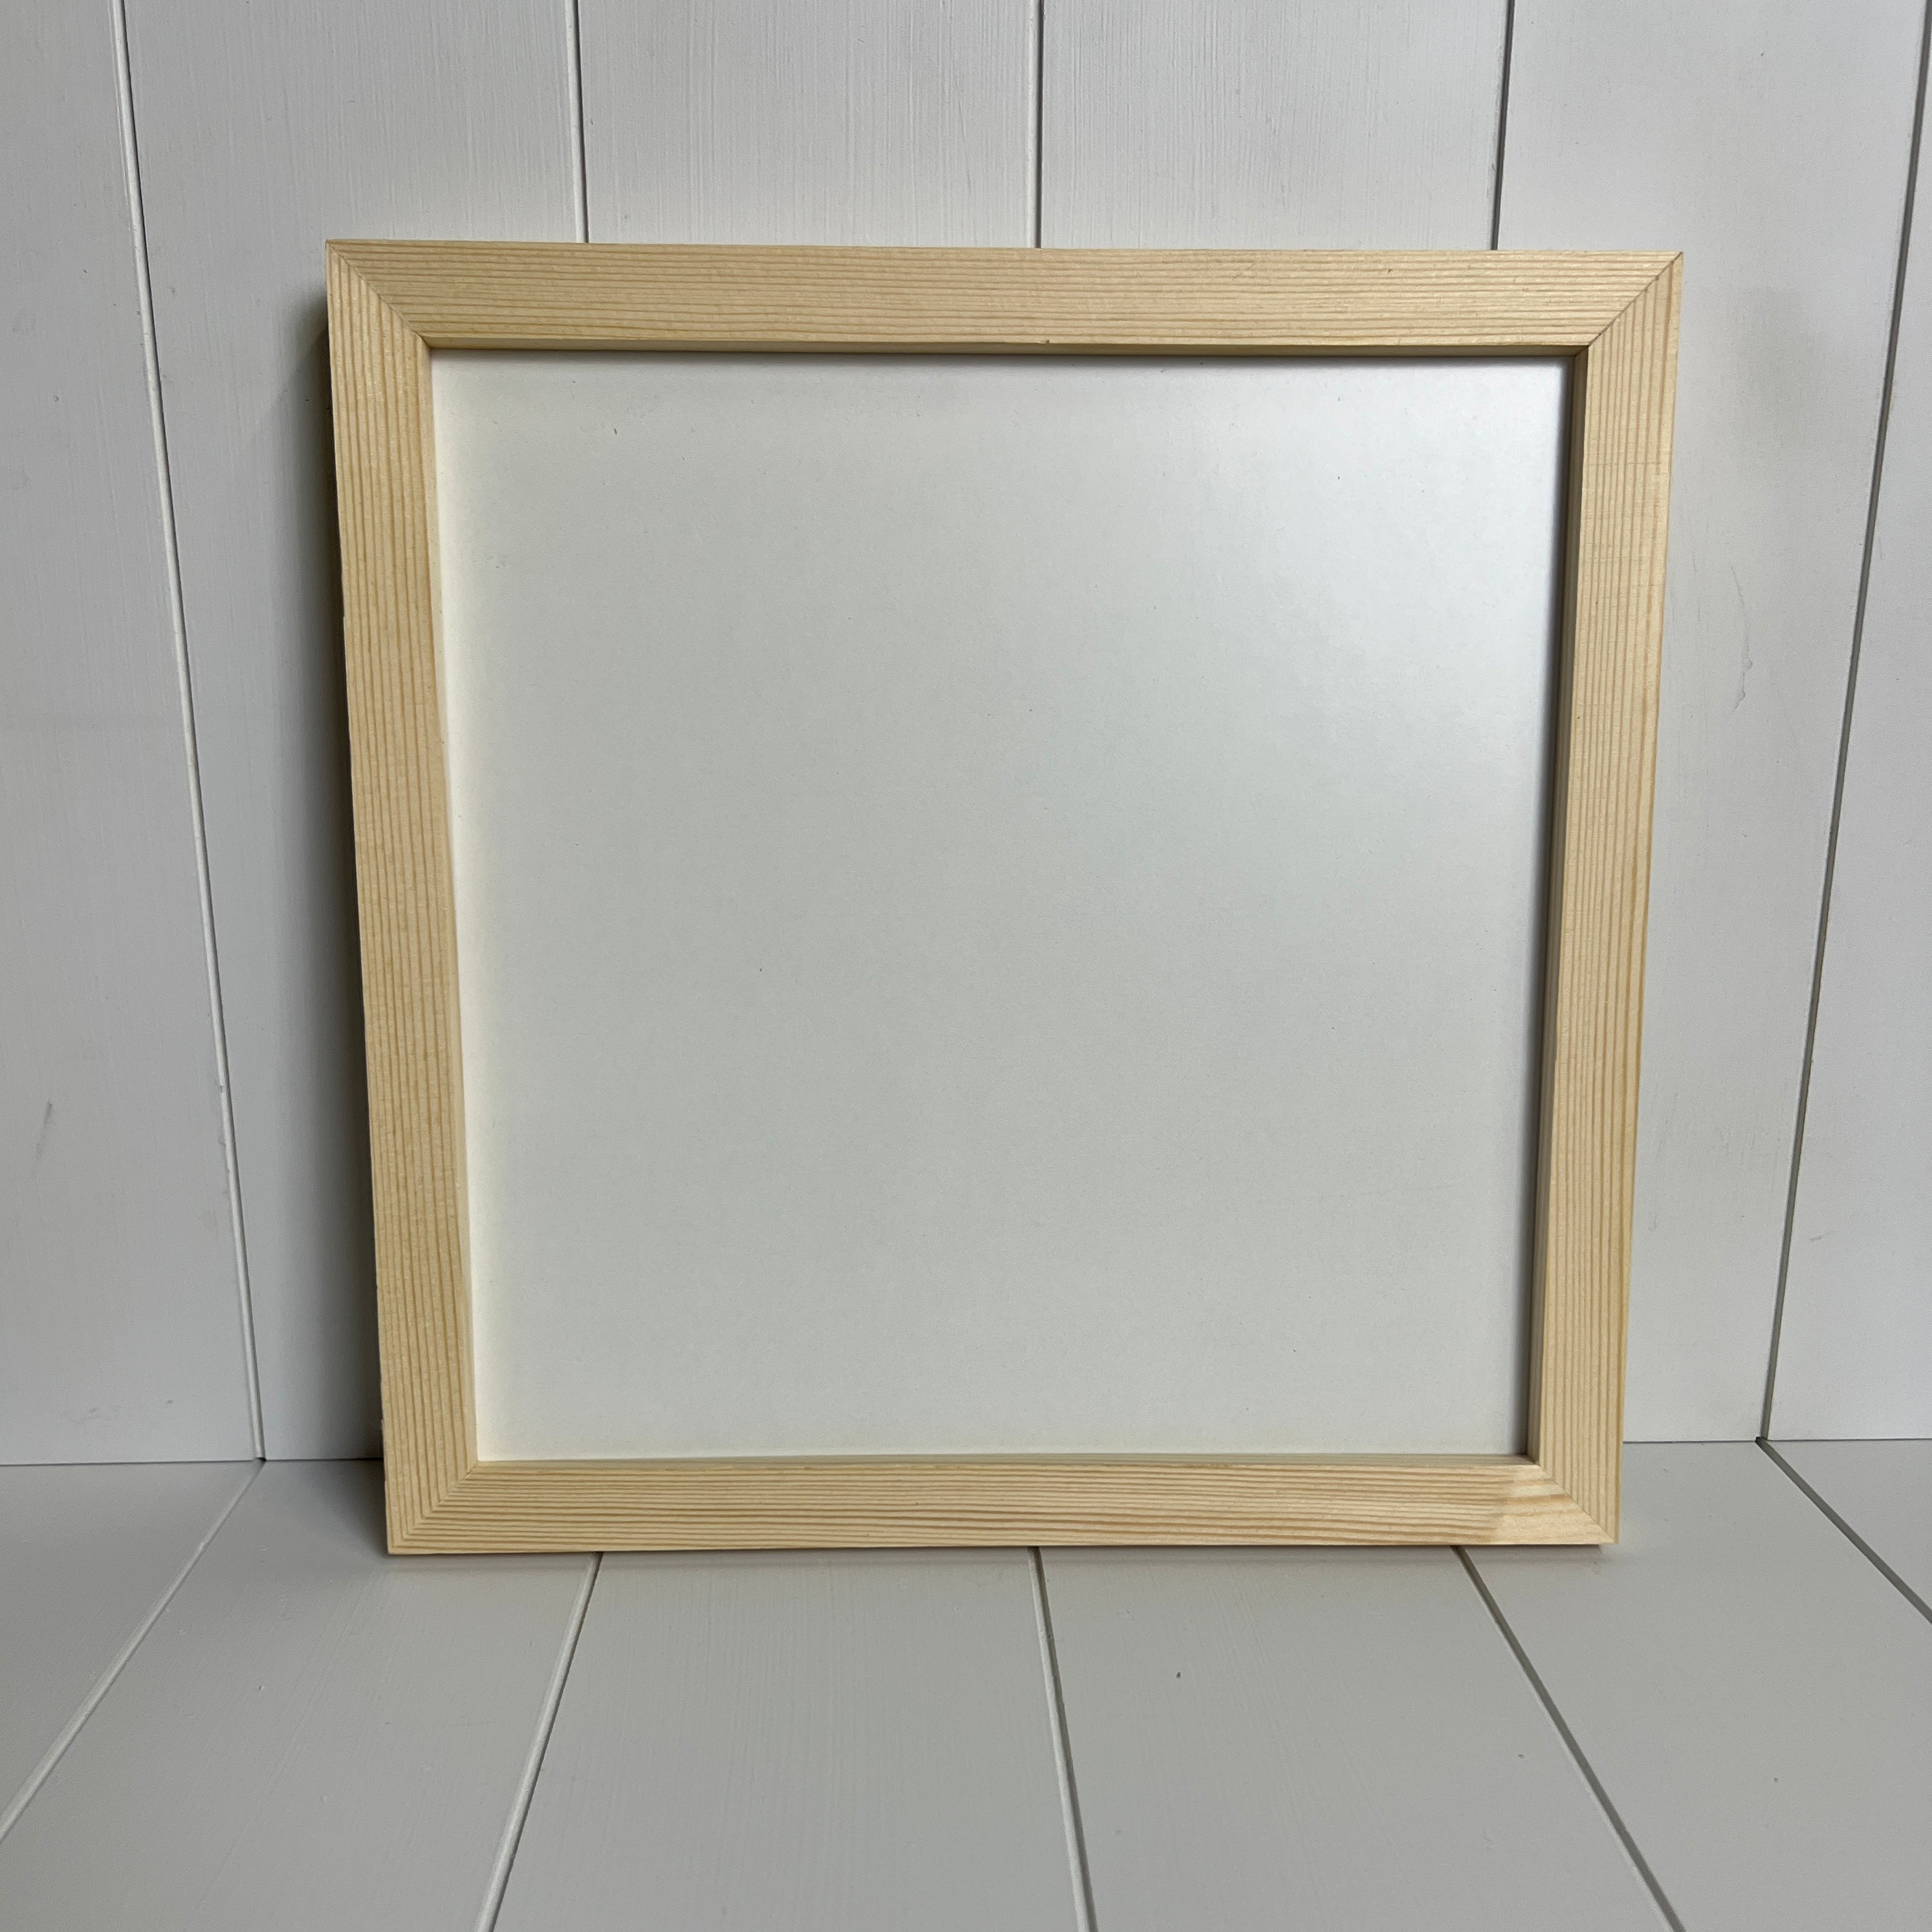 WHOLESALE: 8x8 inch Unstained Wood Frames with Removable Backs – The ...